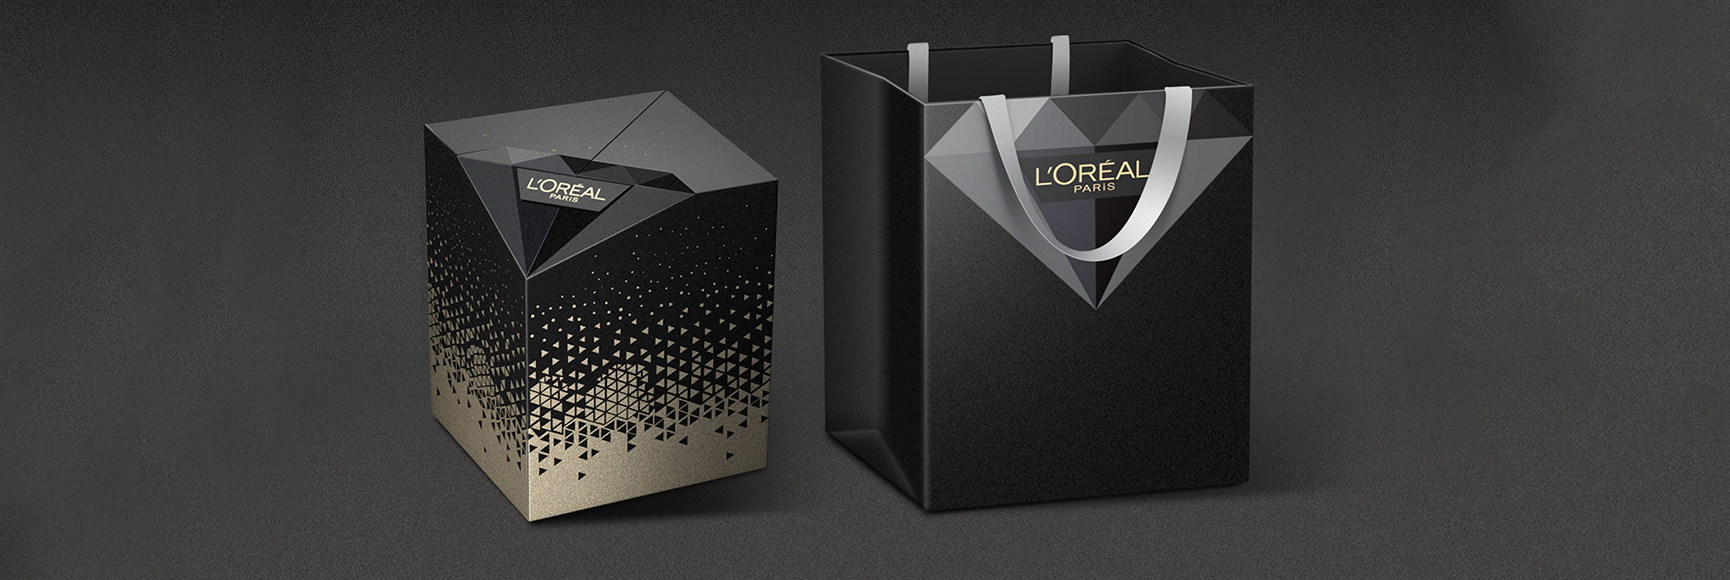 L'Oréal's Age Perfect deluxe skincare PR Giftset Packaging Design Immagine in evidenza